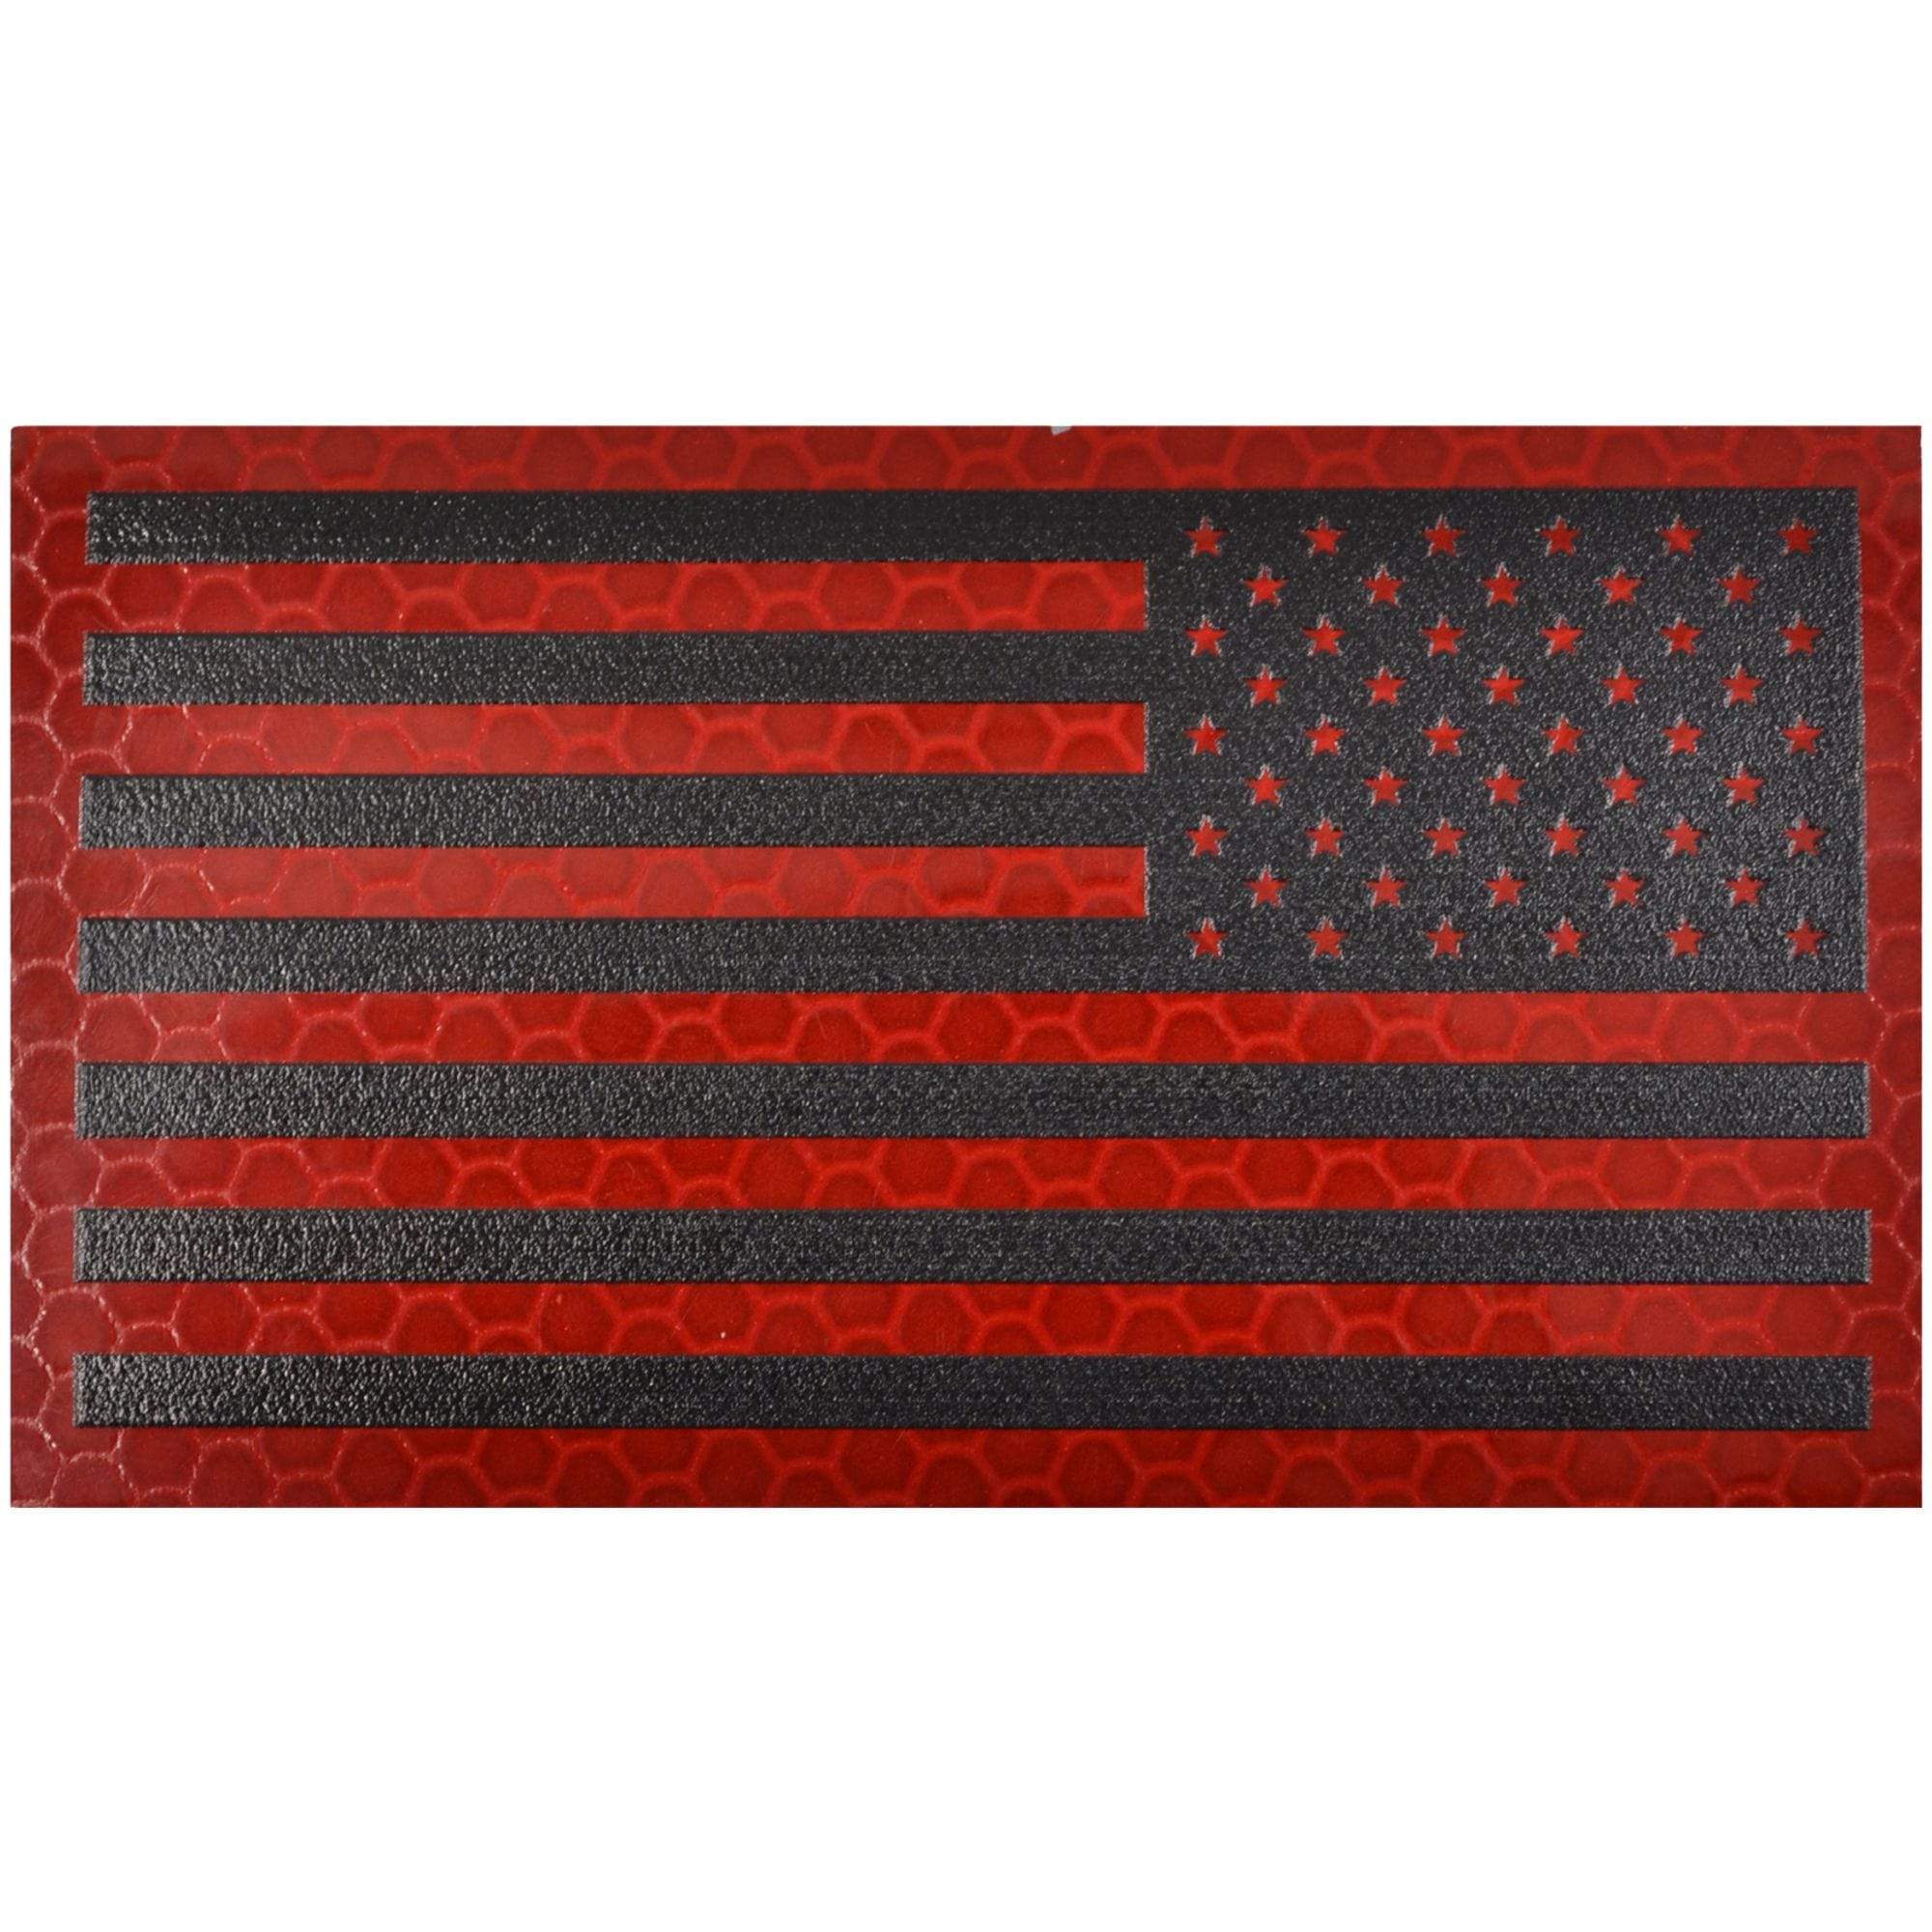 Tactical Gear Junkie Patches Reverse Reflective Red/Black US Flag - 2x3.5 Patch